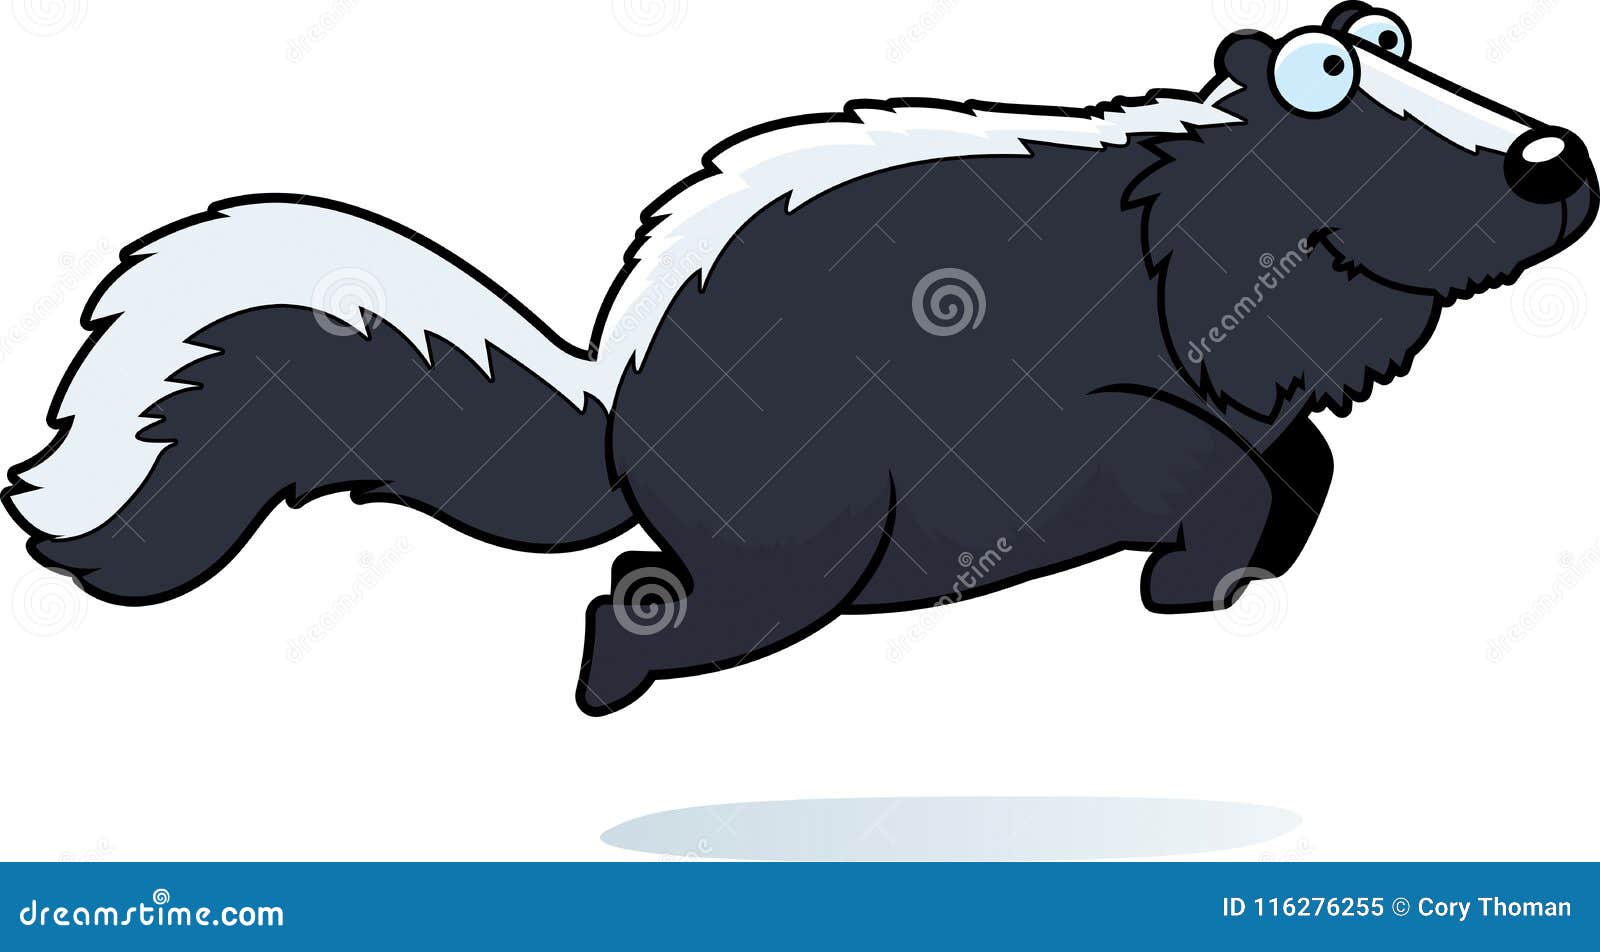 Illustration about A cartoon illustration of a skunk jumping. 